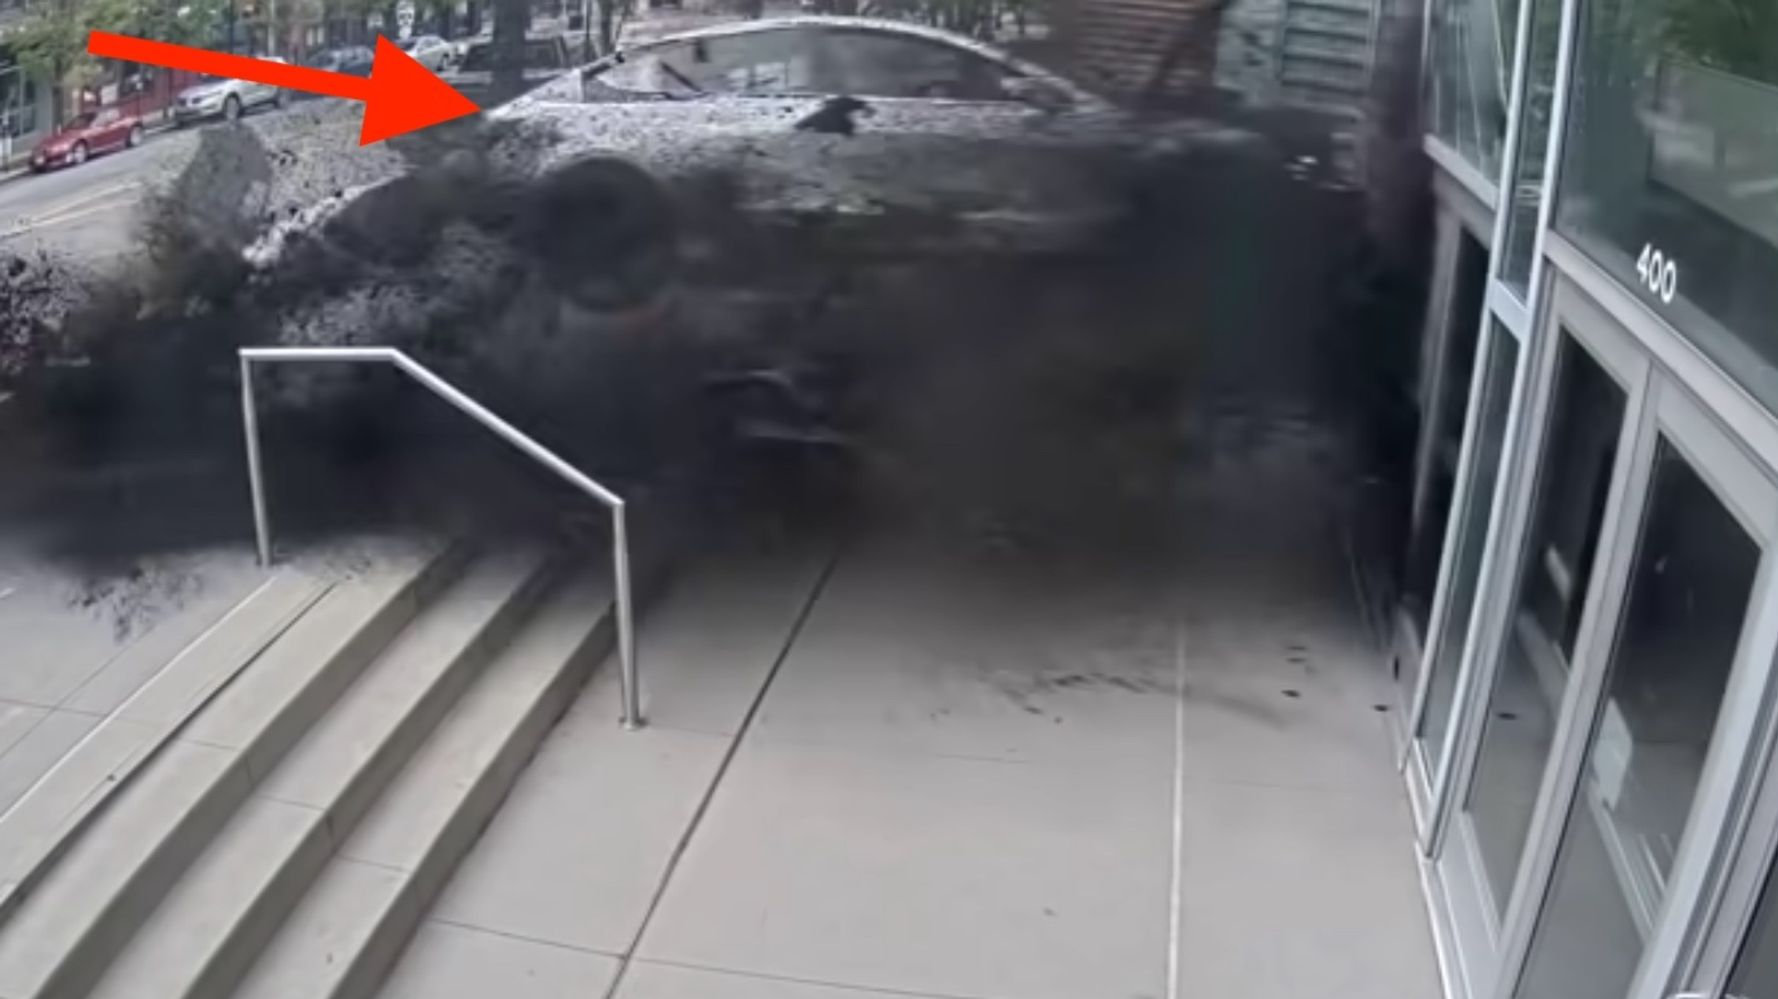 Watch Stunning Video As Tesla Goes Airborne, Slams Into Building At 70 MPH